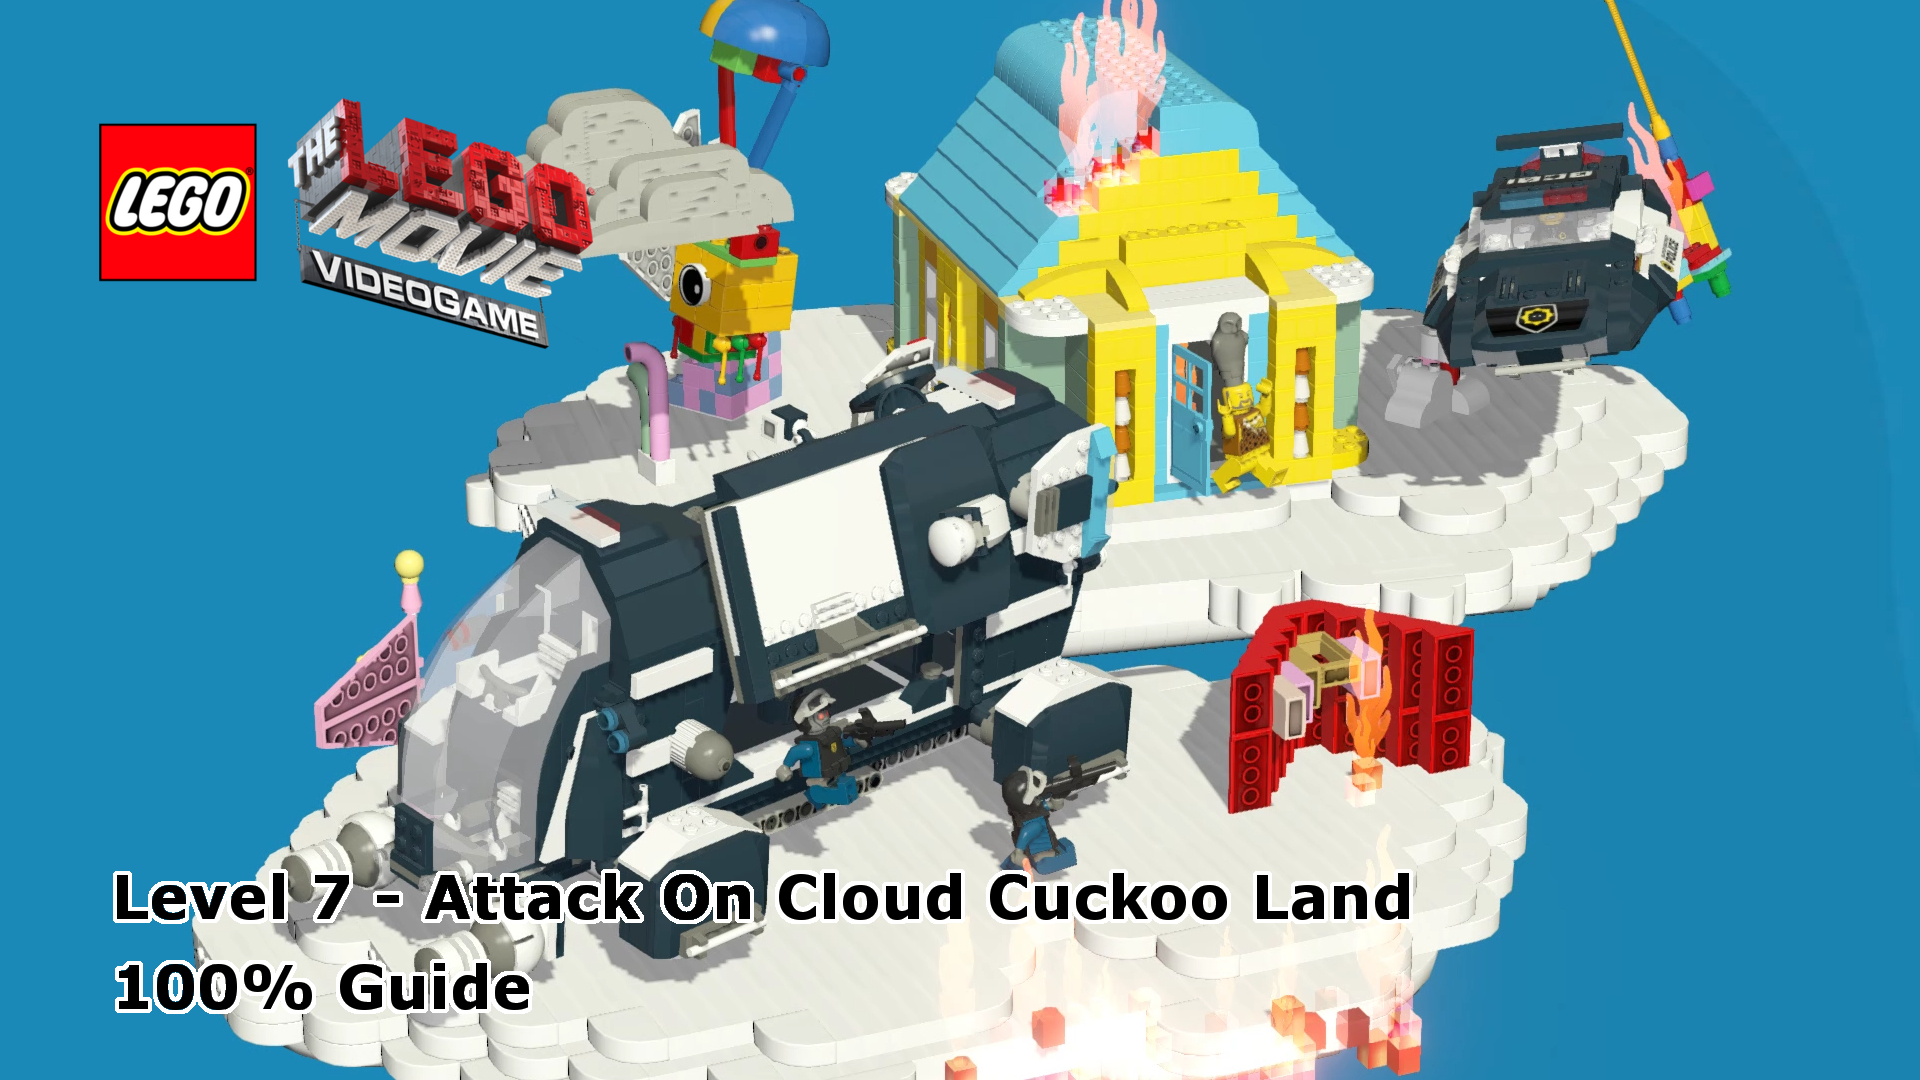 LEGO Movie Videogame – Attack On Cloud Cuckoo Land 100%